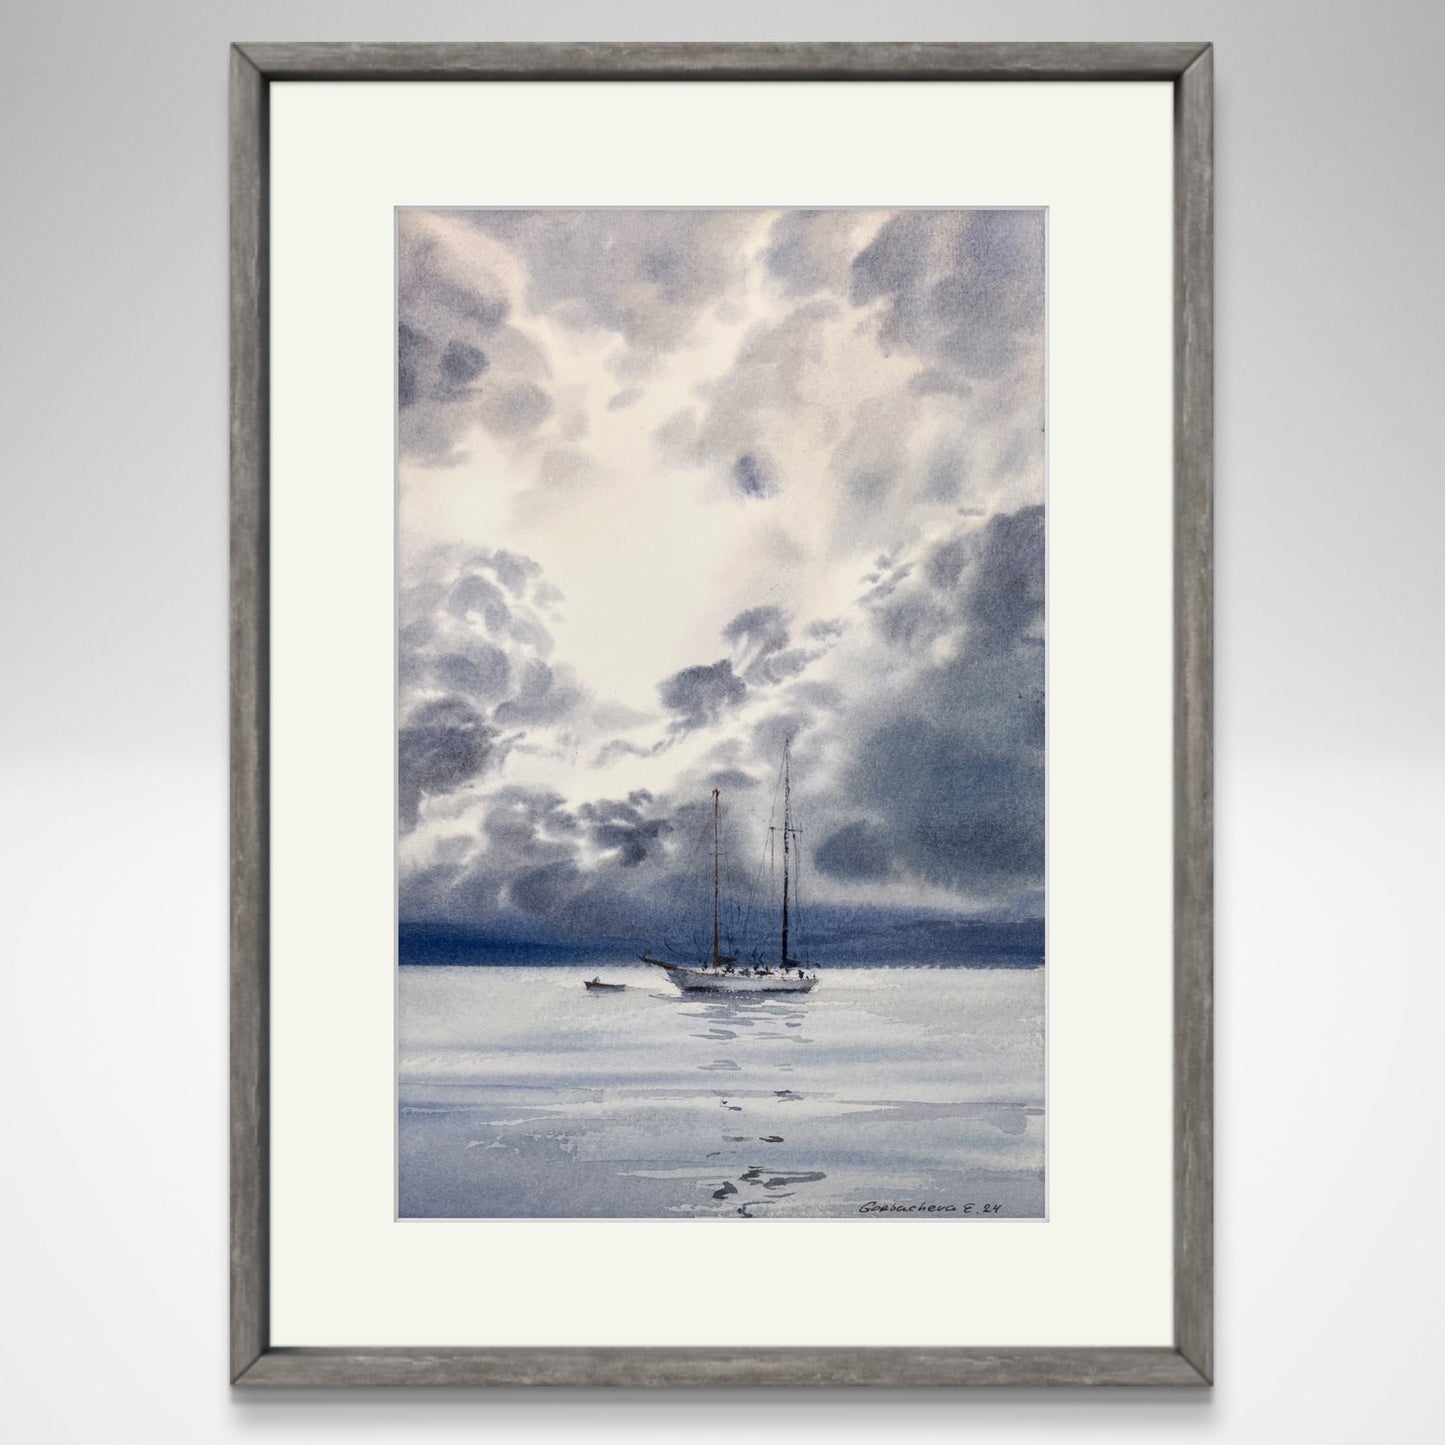 Kingdom of the Clouds #4 - Original painting with Gray Cloud Seascape